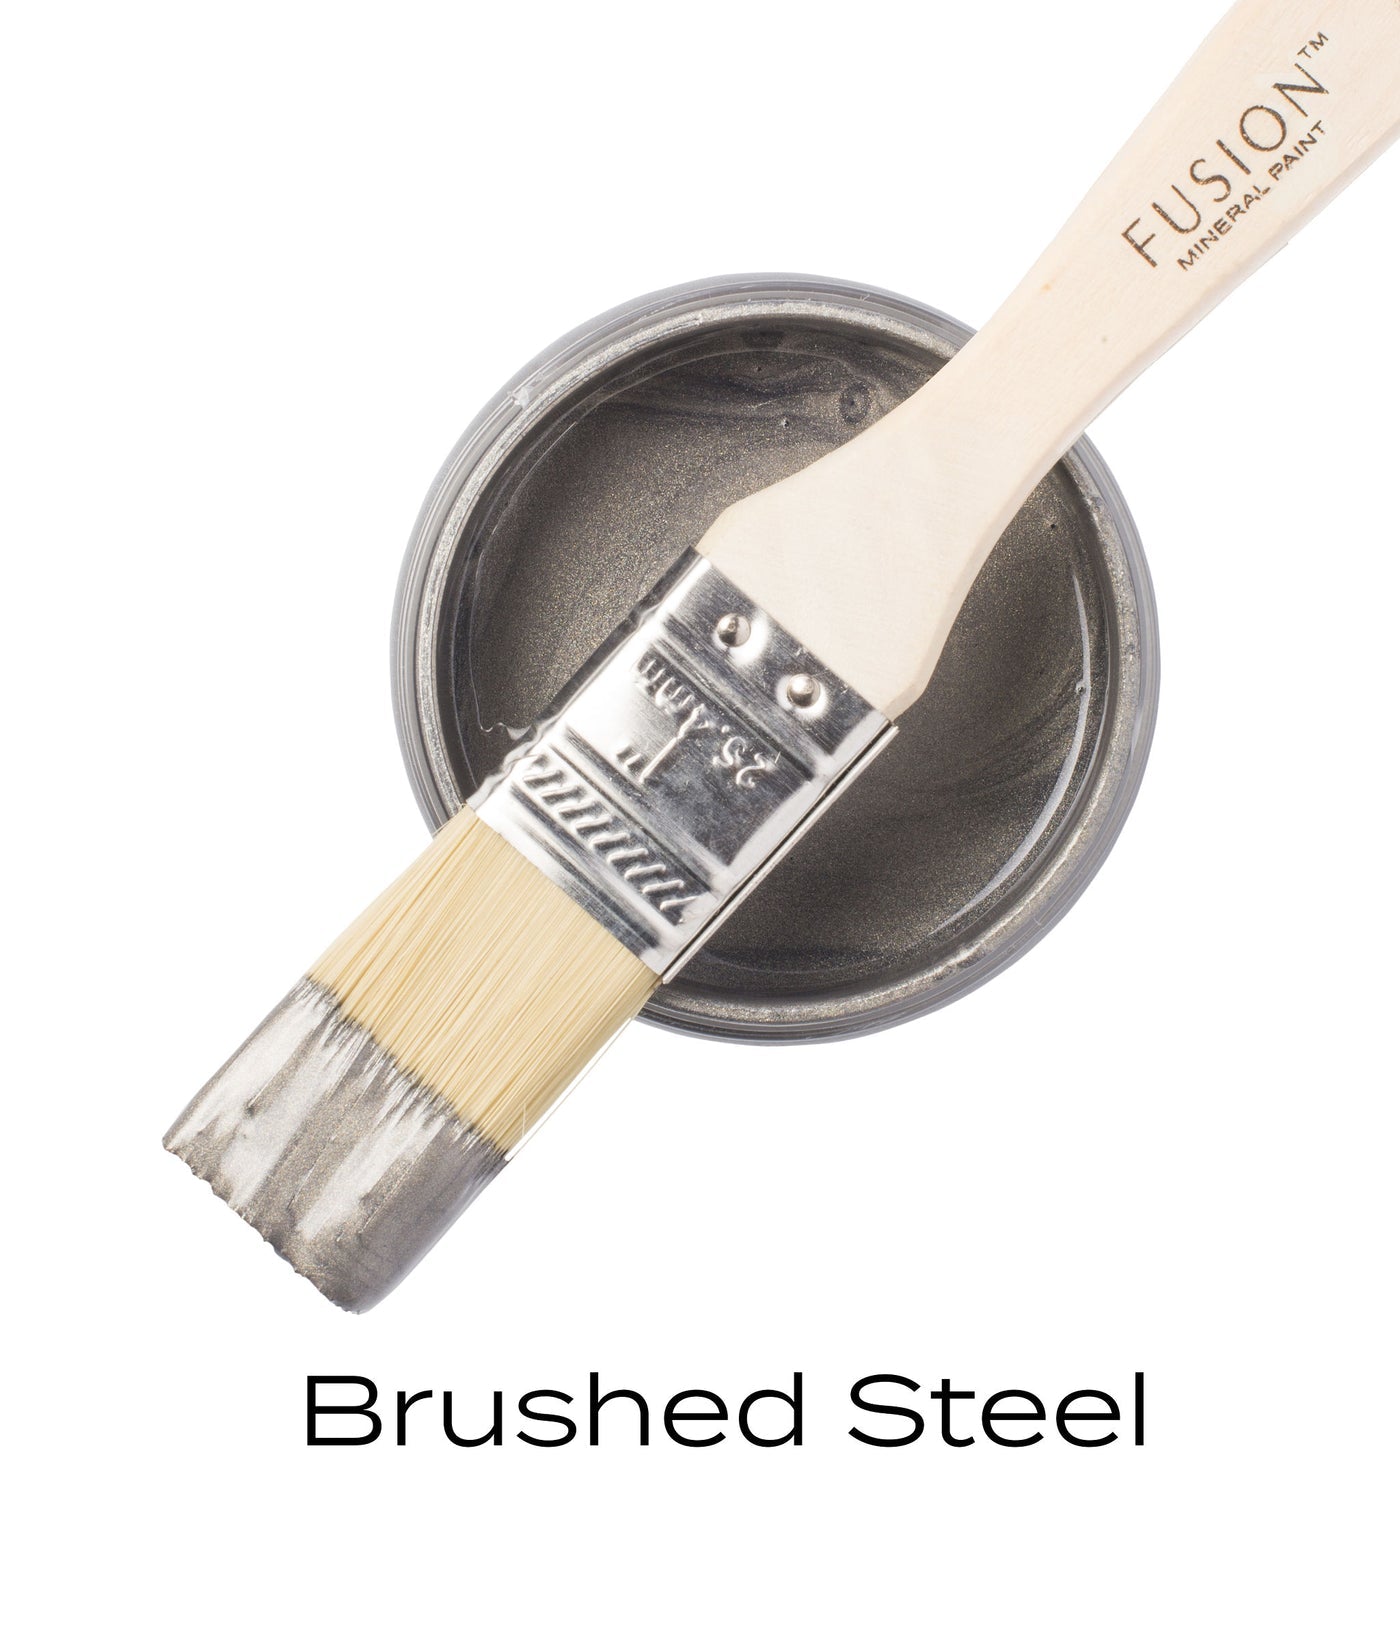 BRUSHED STEEL - FUSION METALLICS COLLECTION